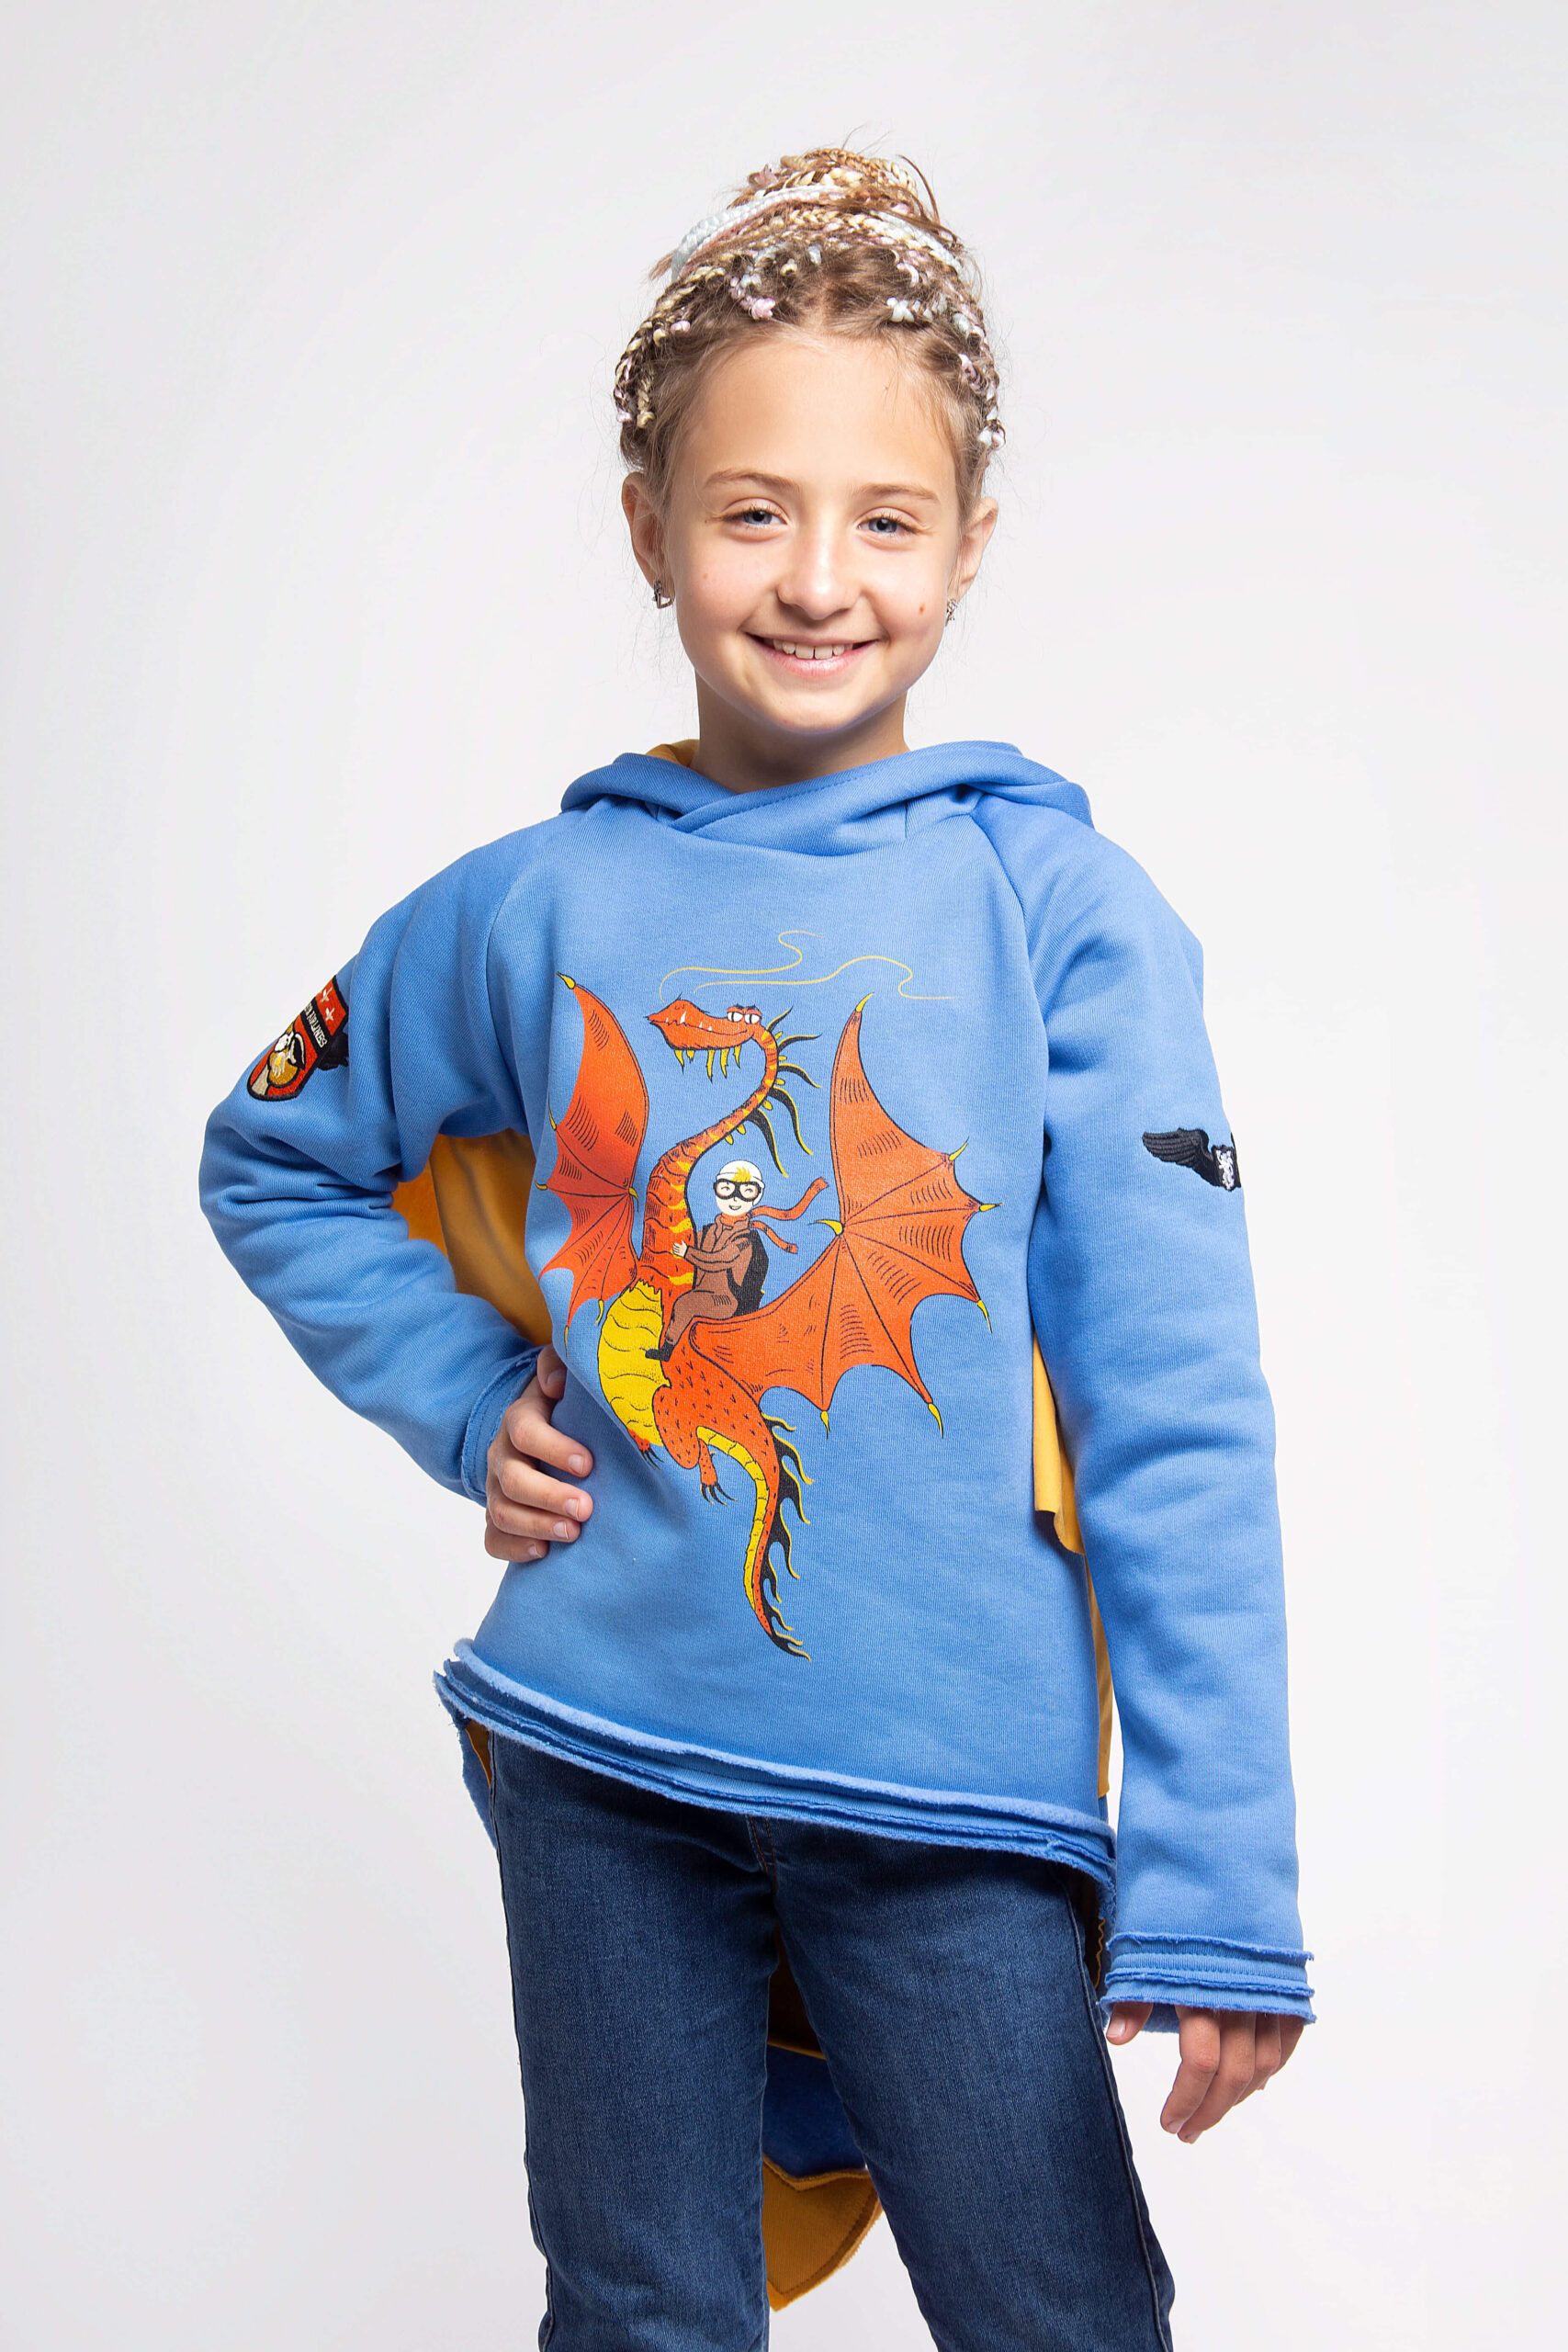 Kids Hoodie Dragon. Color sky blue. Hoodie: unisex, well suited for both boys and girls.